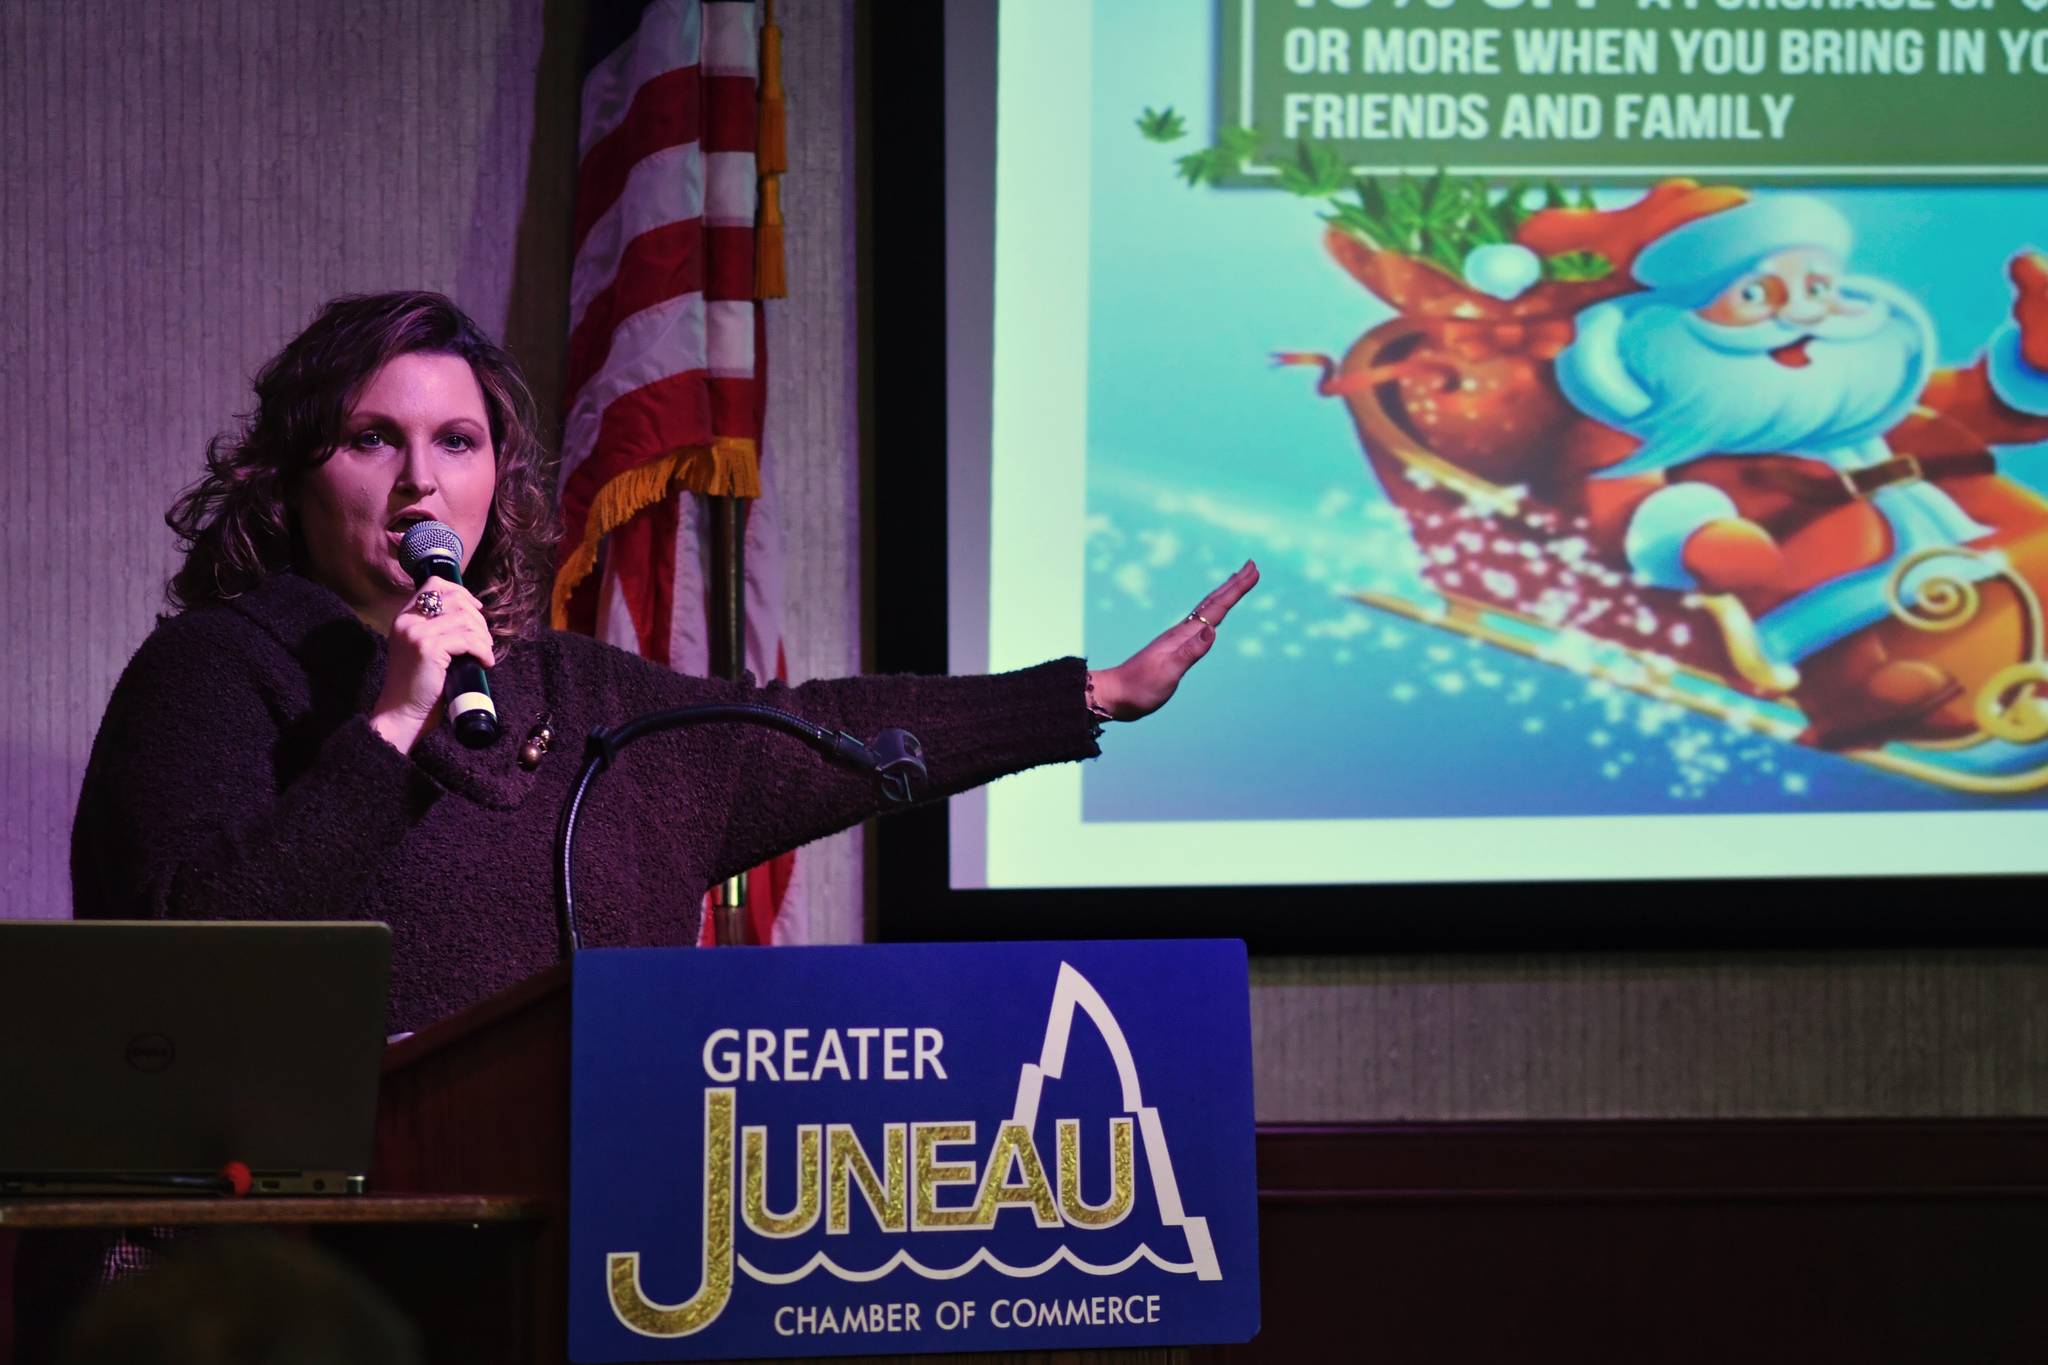 Jo McGuire, Senior Project Manager of Tongass Substance Screening Inc., speaks to the Juneau Chamber of Commerce during their weekly luncheon at Hangar Ballroom on Thursday, March 7, 2019. (Michael Penn | Juneau Empire)